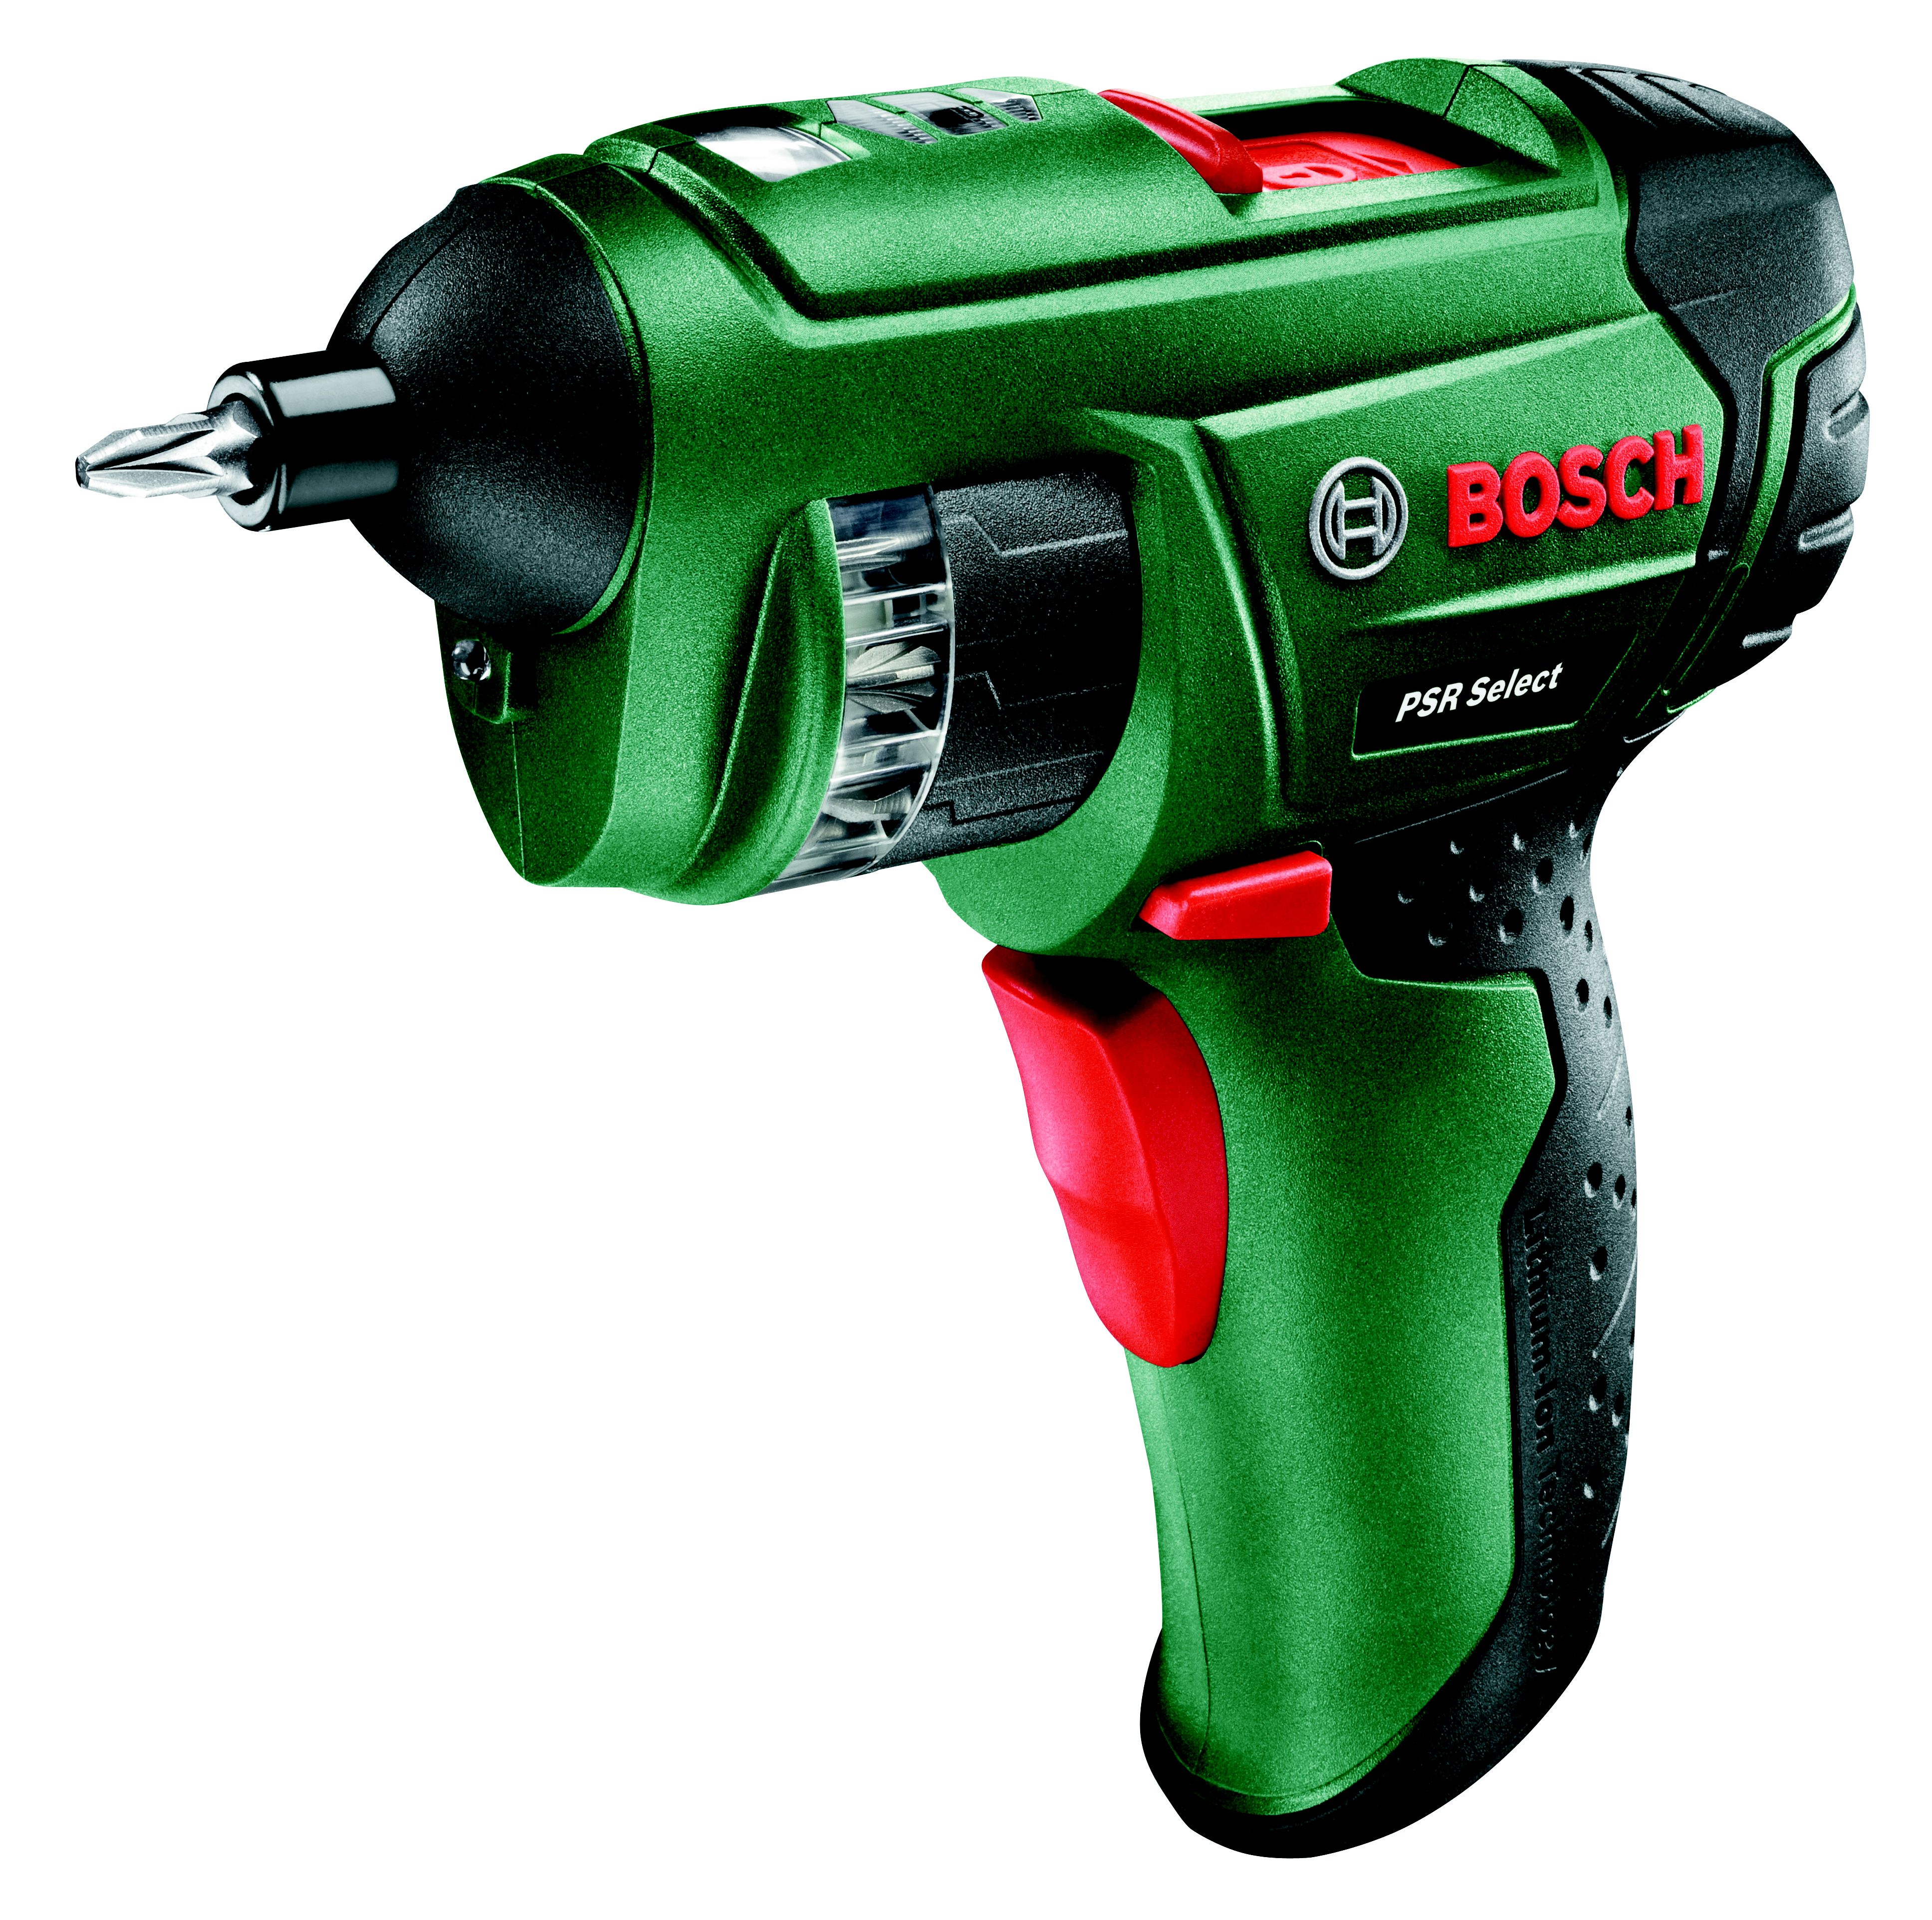 Bosch IXO 6 review: this electric screwdriver may be the most